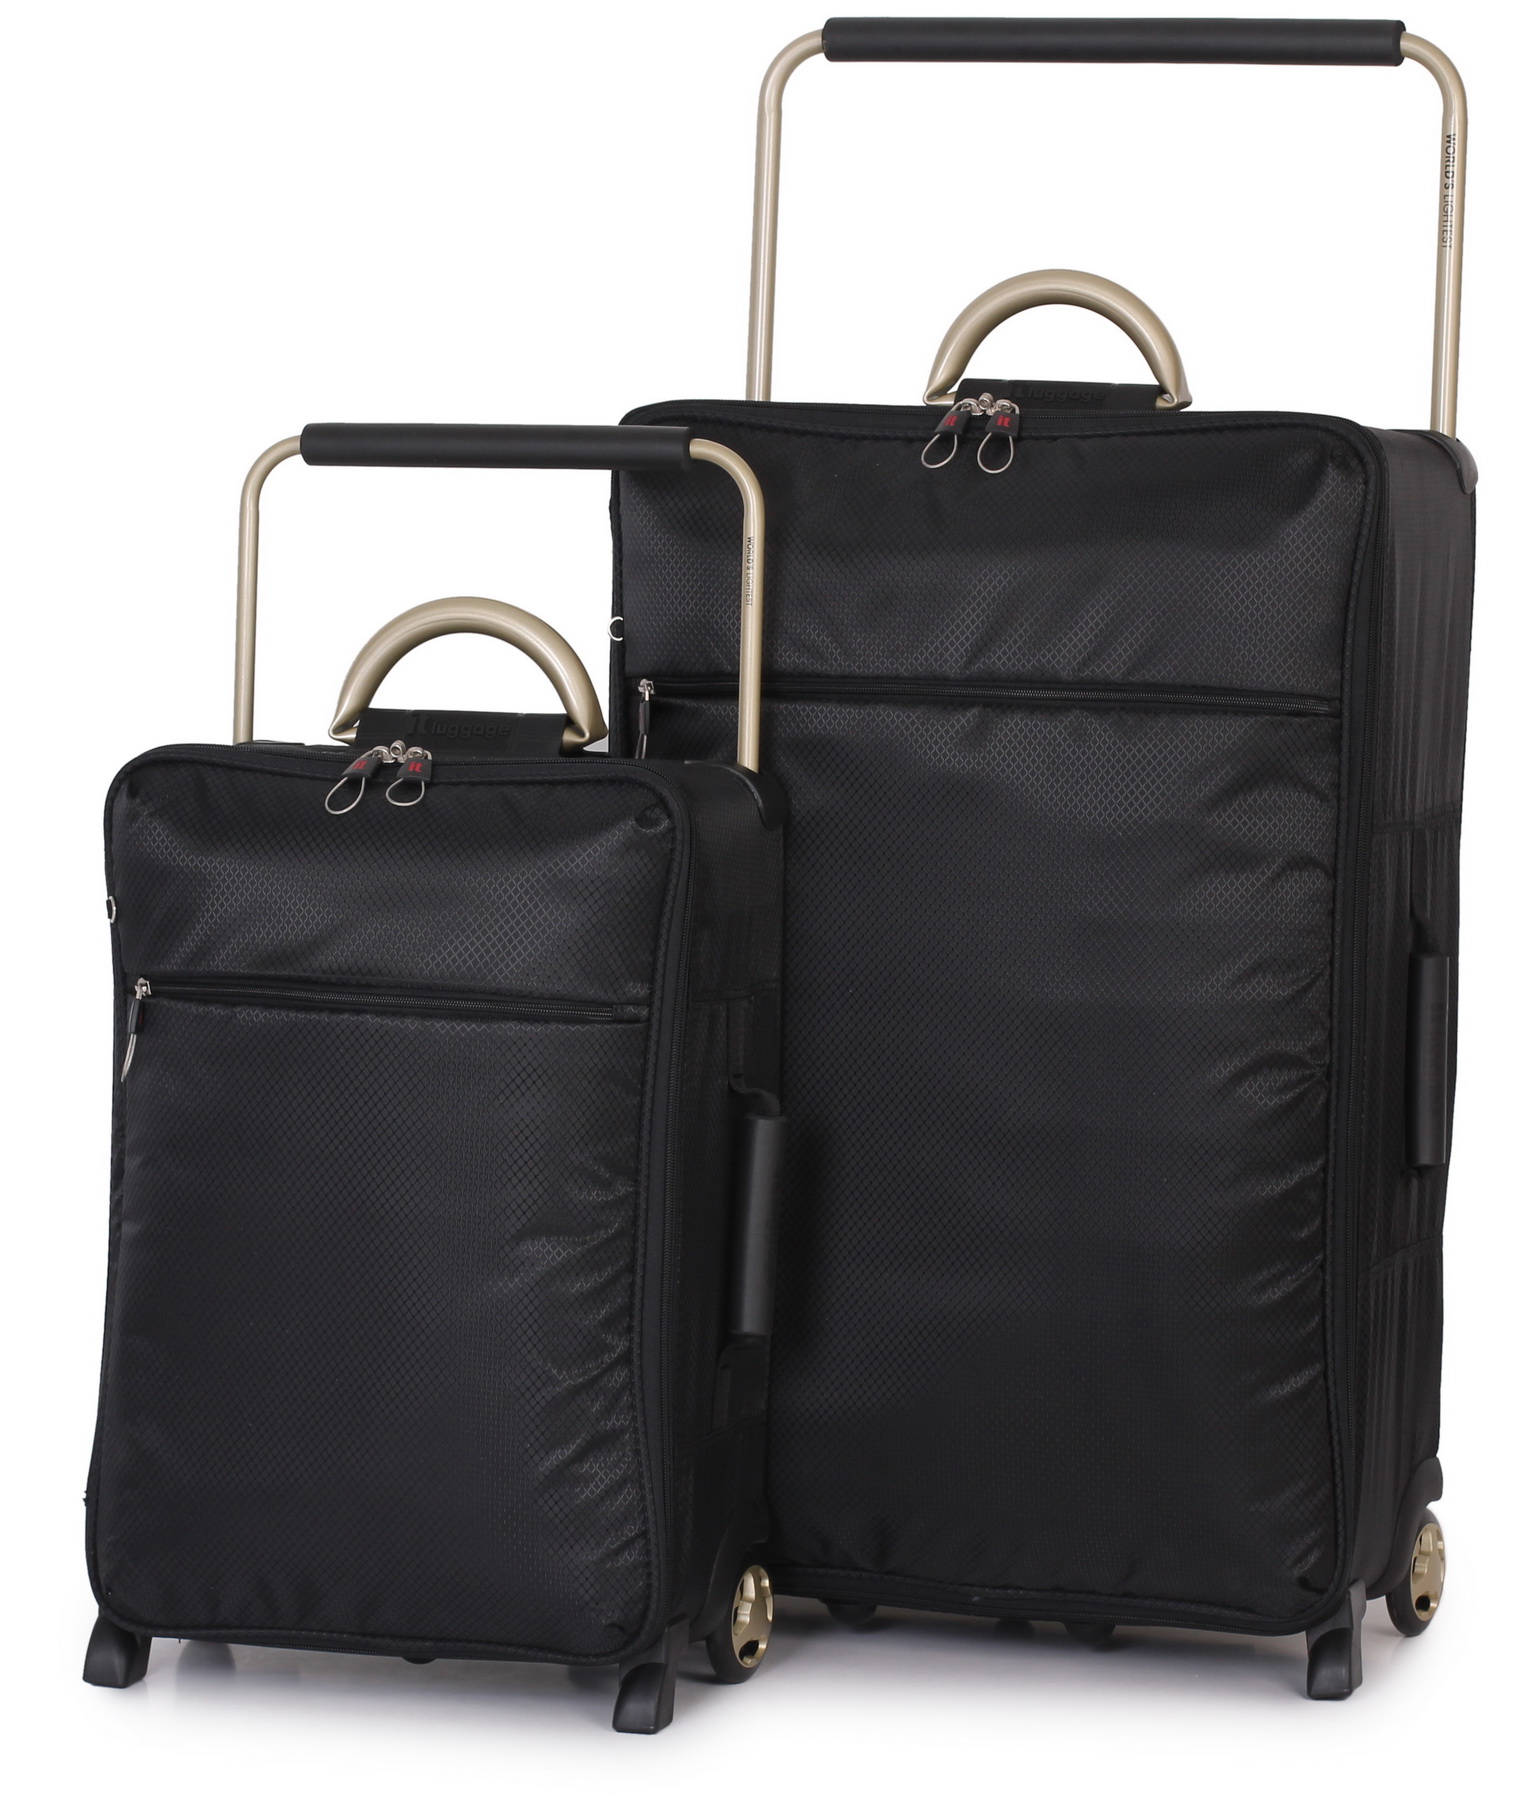 it travel luggage reviews